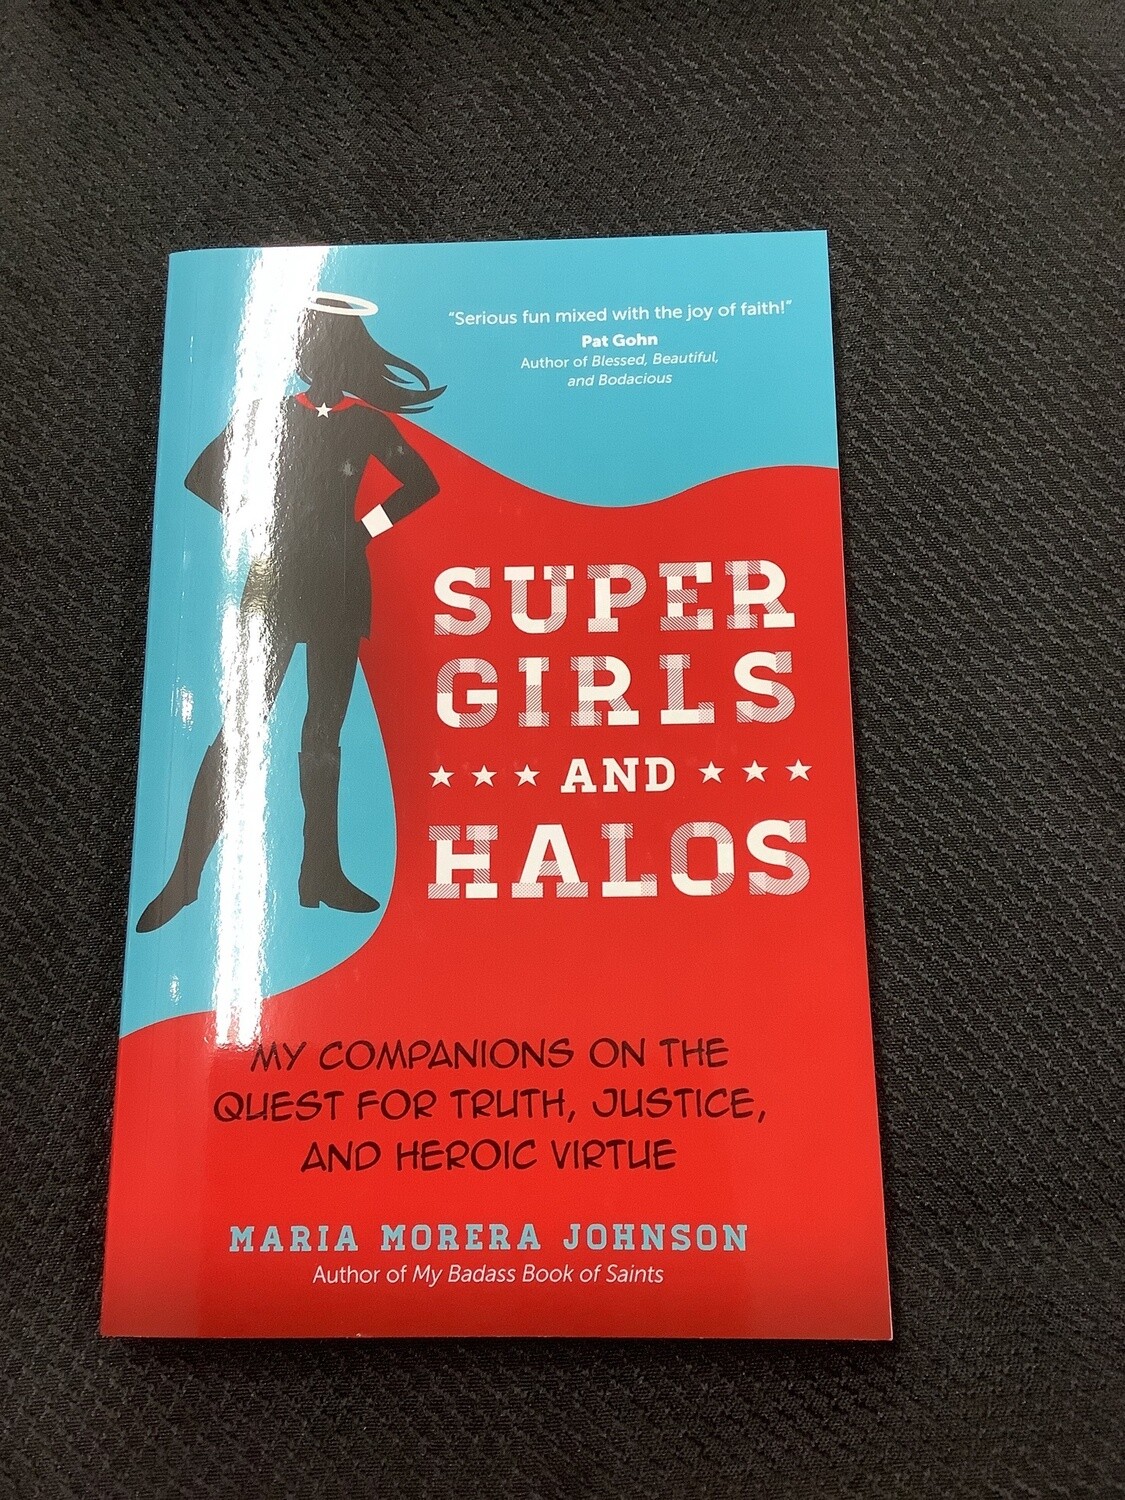 Super Girls And Halos My Companions on the Quest for Truth, Justice, and Heroic Virtue - Maria Morera Johnson